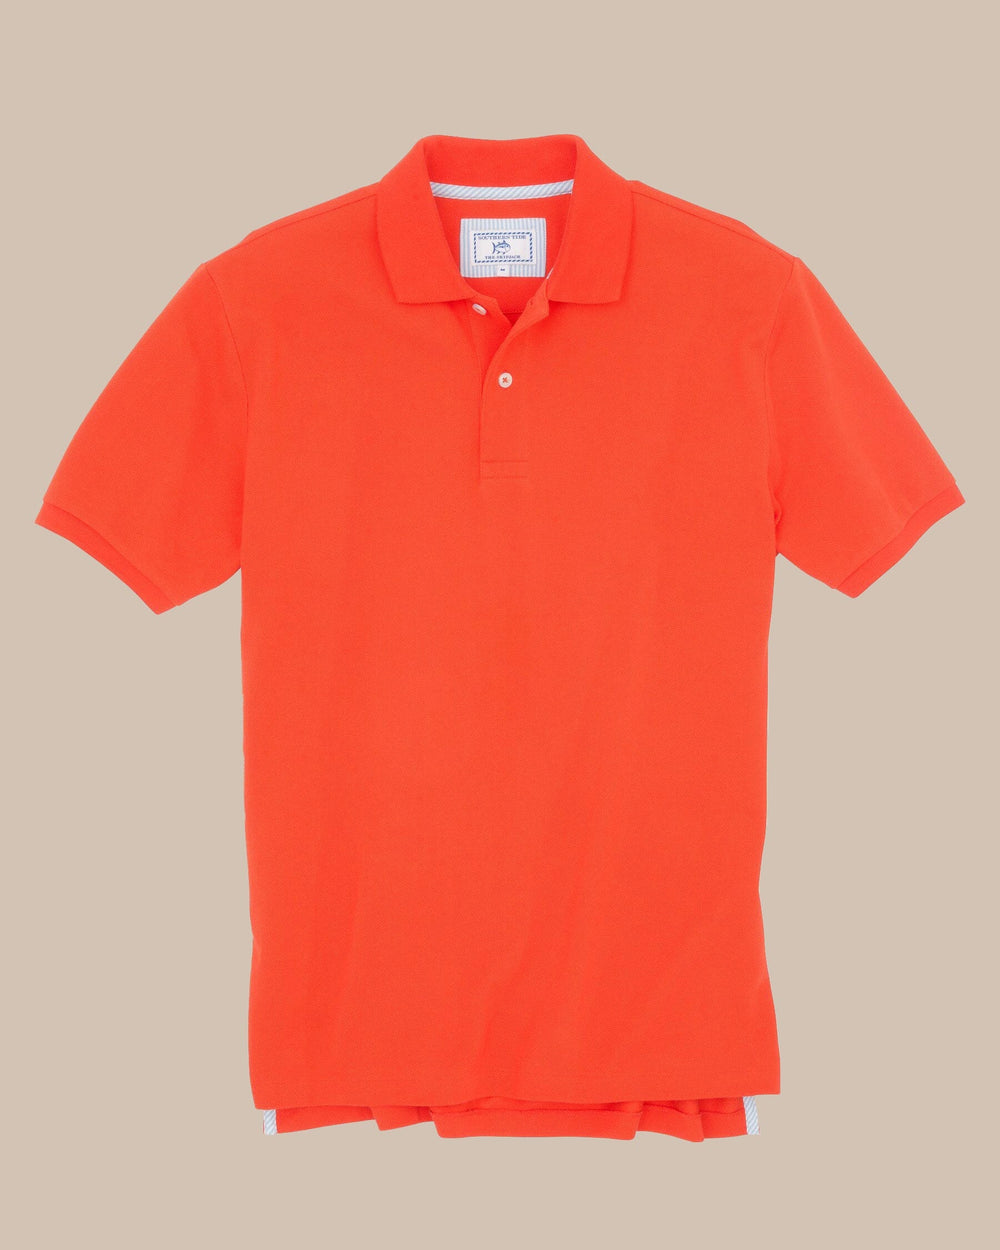 The front view of the Men's Orange Skipjack Gameday Colors Polo Shirt by Southern Tide - Endzone Orange